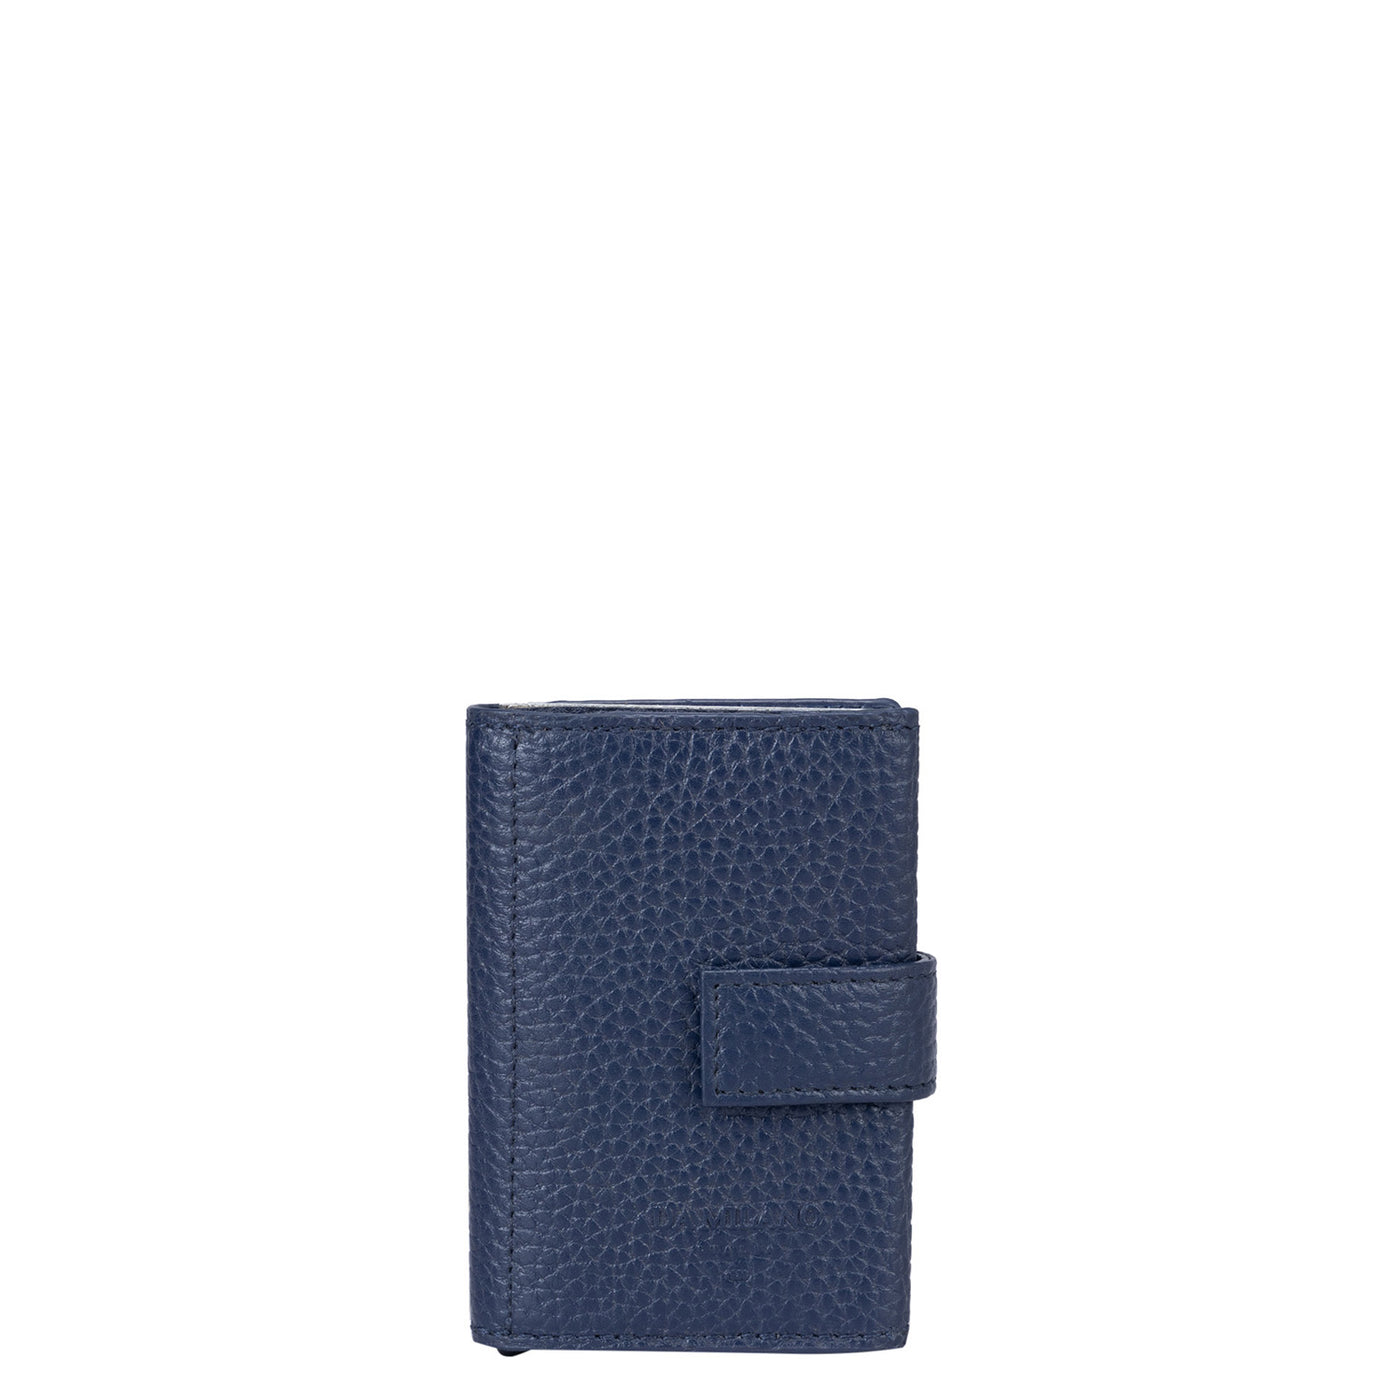 Wax Leather Card Case - Patriot Blue